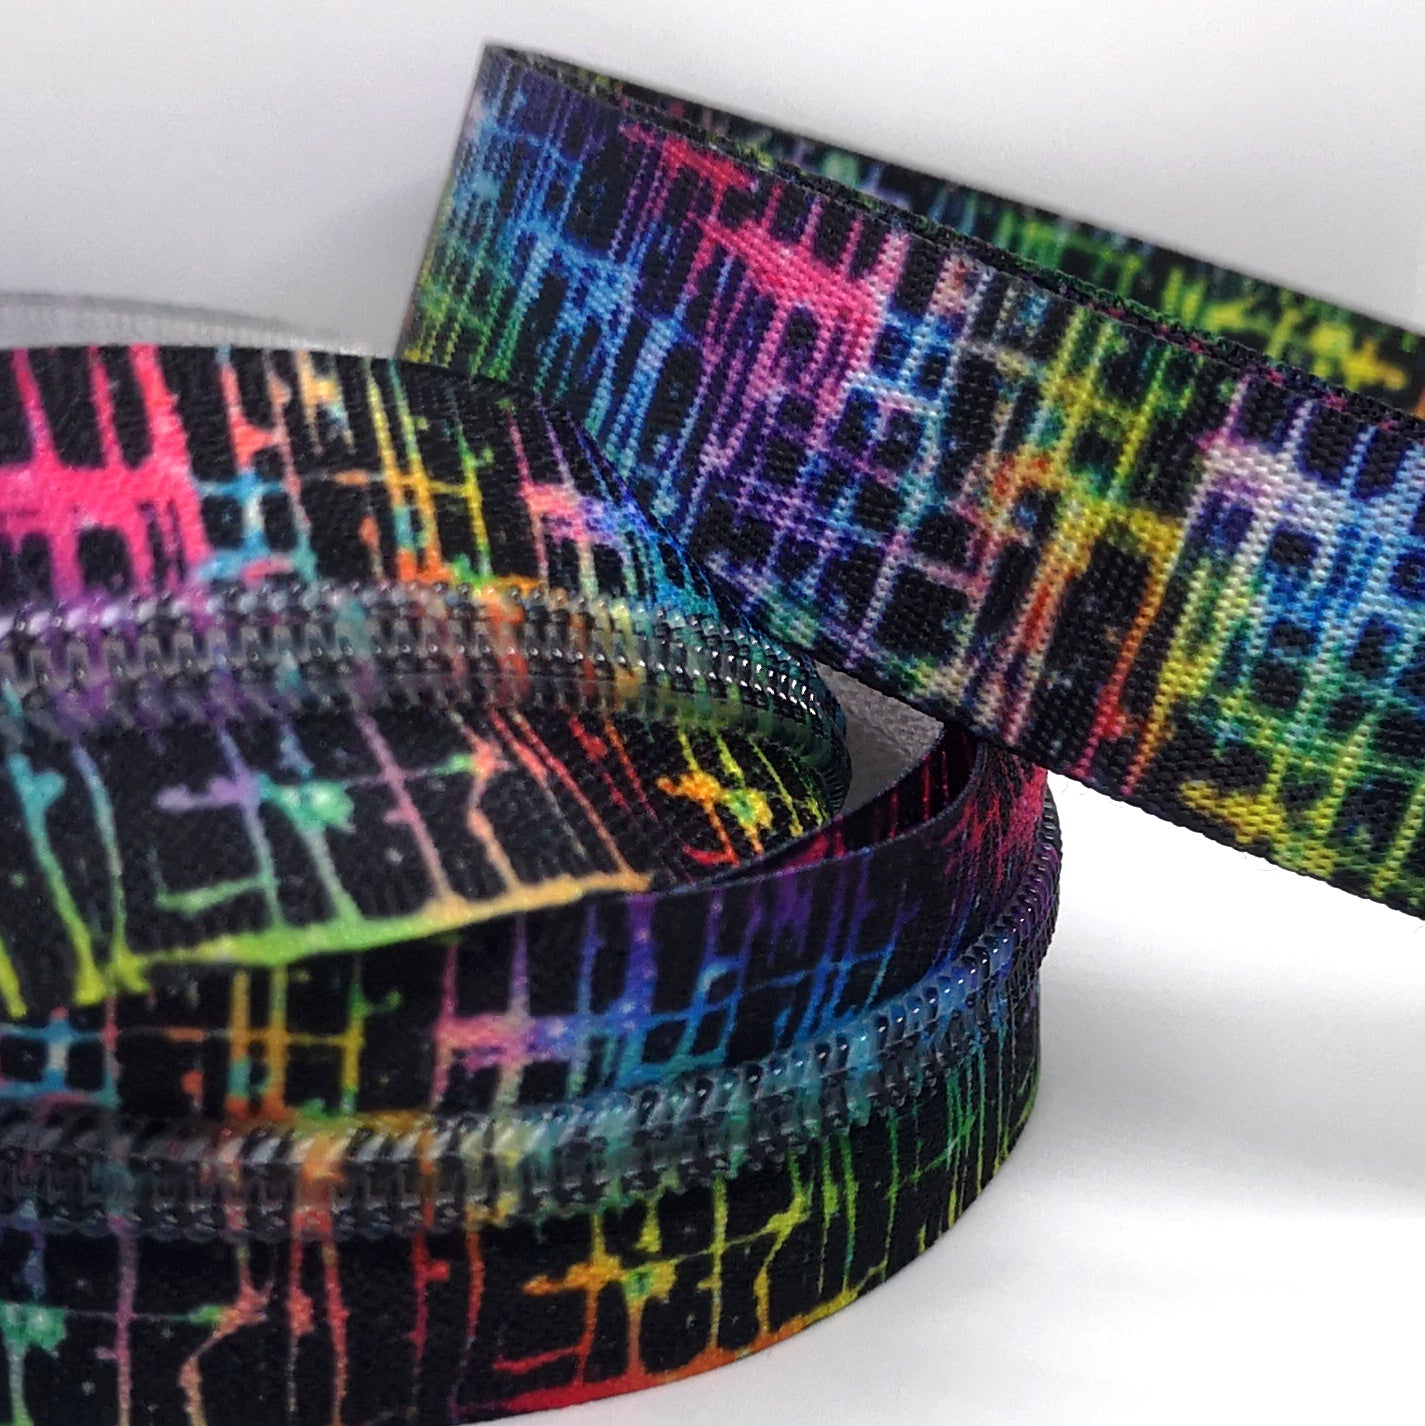 Rainbow Electric Crackle zipper tape with matching teeth